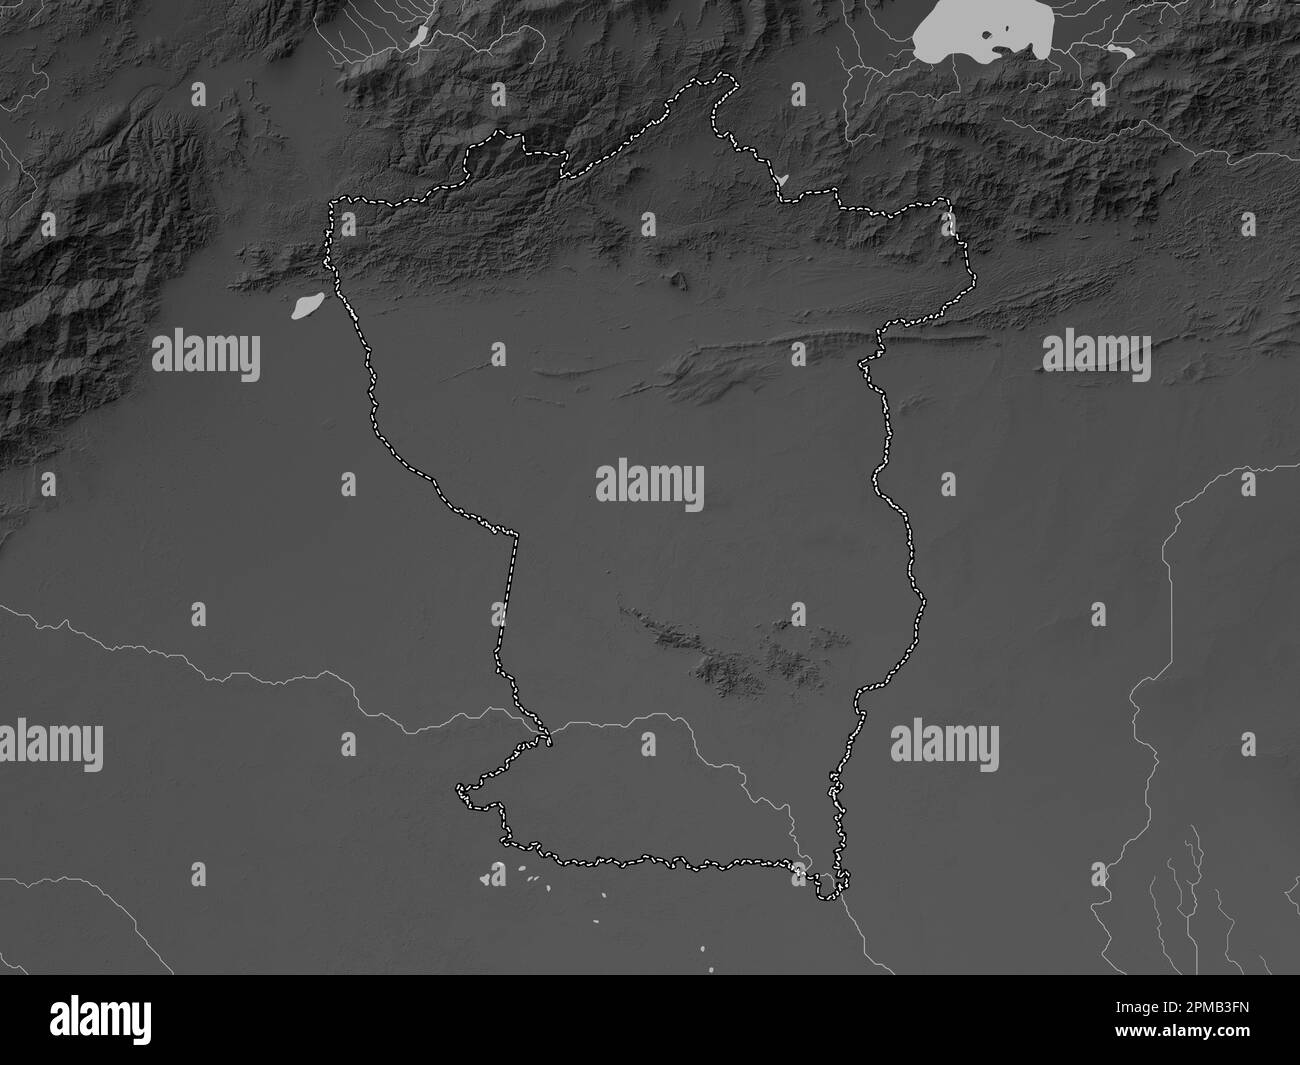 Cojedes, state of Venezuela. Grayscale elevation map with lakes and rivers Stock Photo